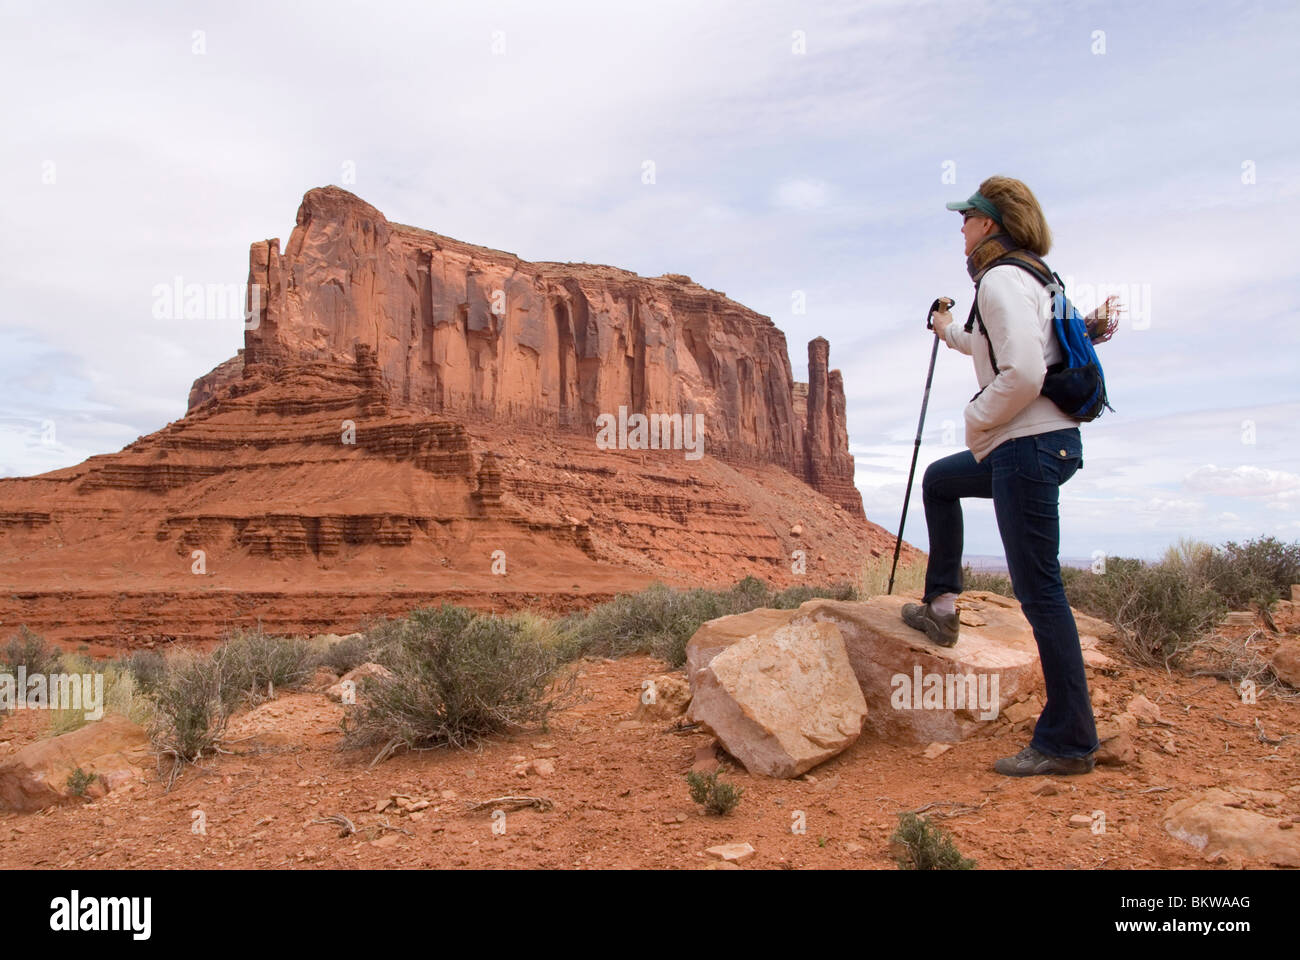 Hiker in foreground with the buttes and mesas of the Navajo Tribal Park in background Monument Valley Utah USA Kim Paumier MR Stock Photo